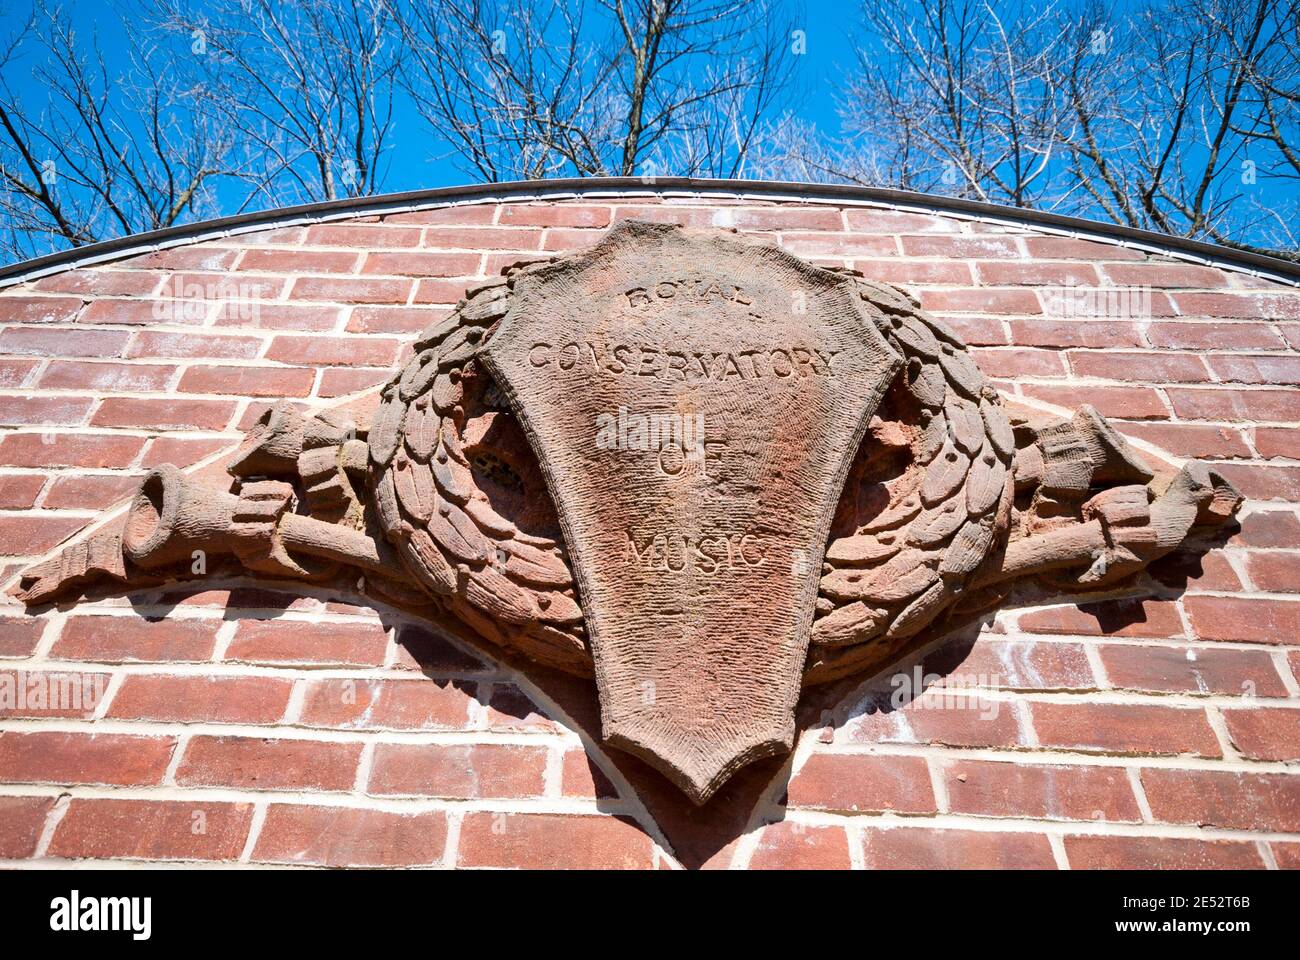 A stone facade with the inscription the Royal Conservatory of Music rescued from a demolished Toronto building. Stock Photo